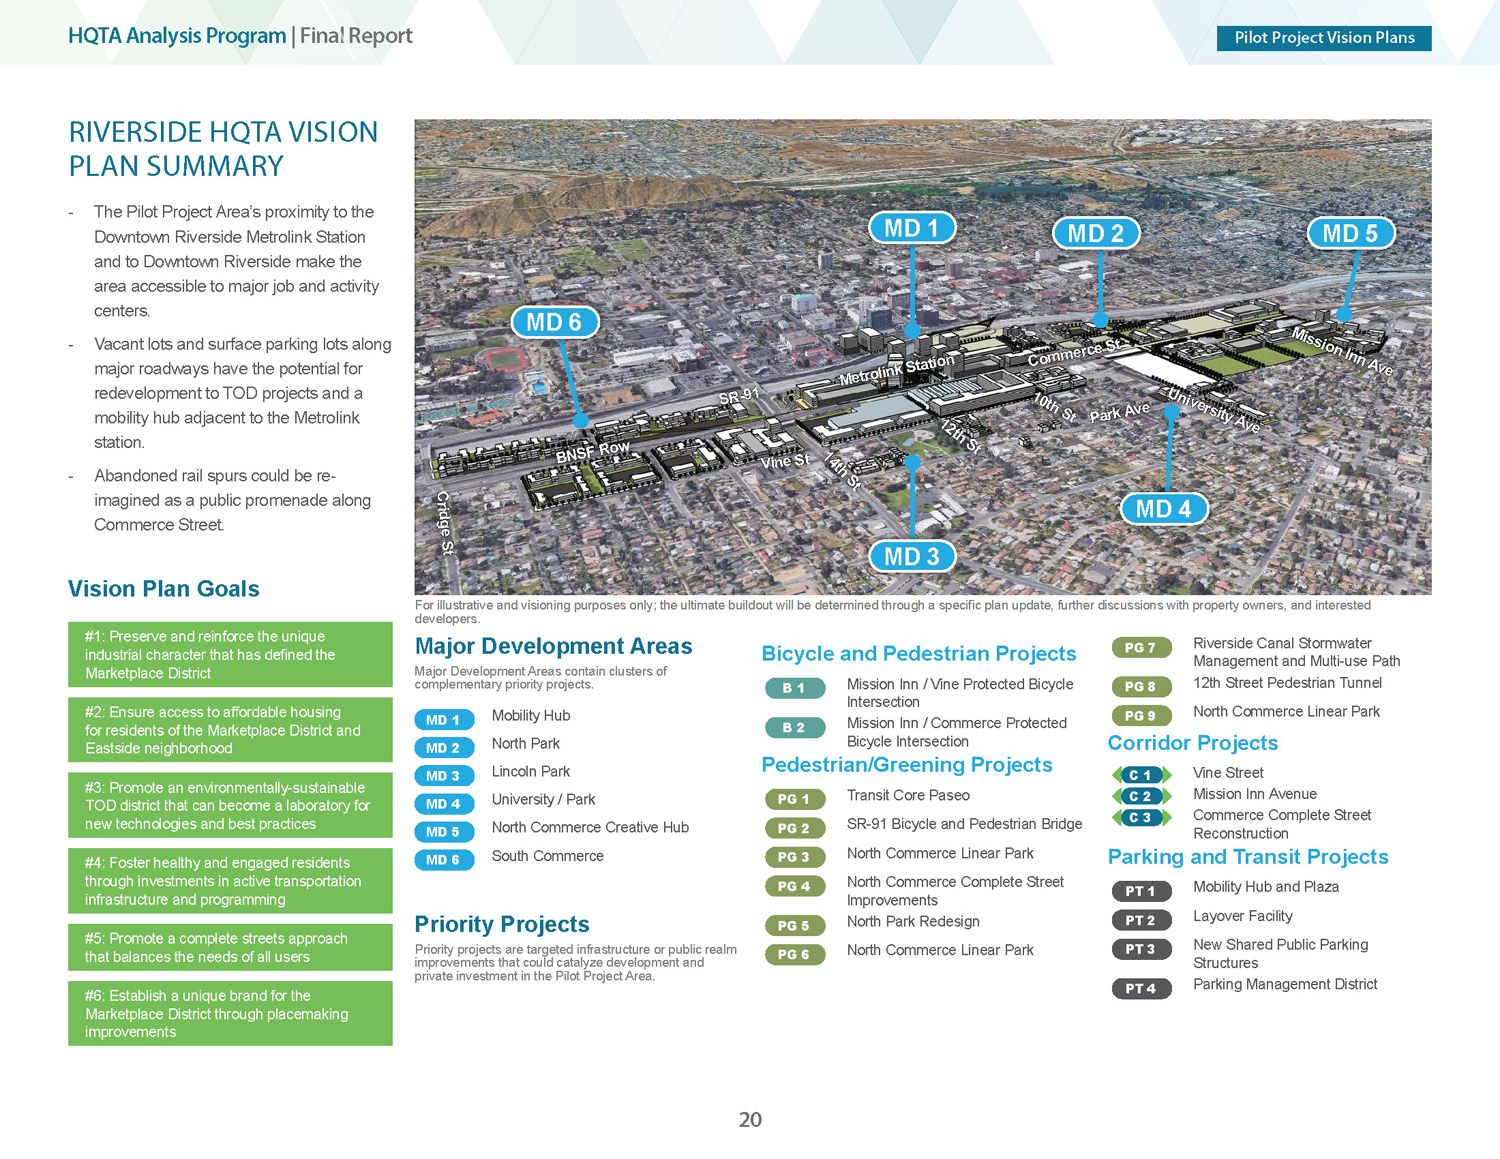 Overview of Riverside Vision Plan